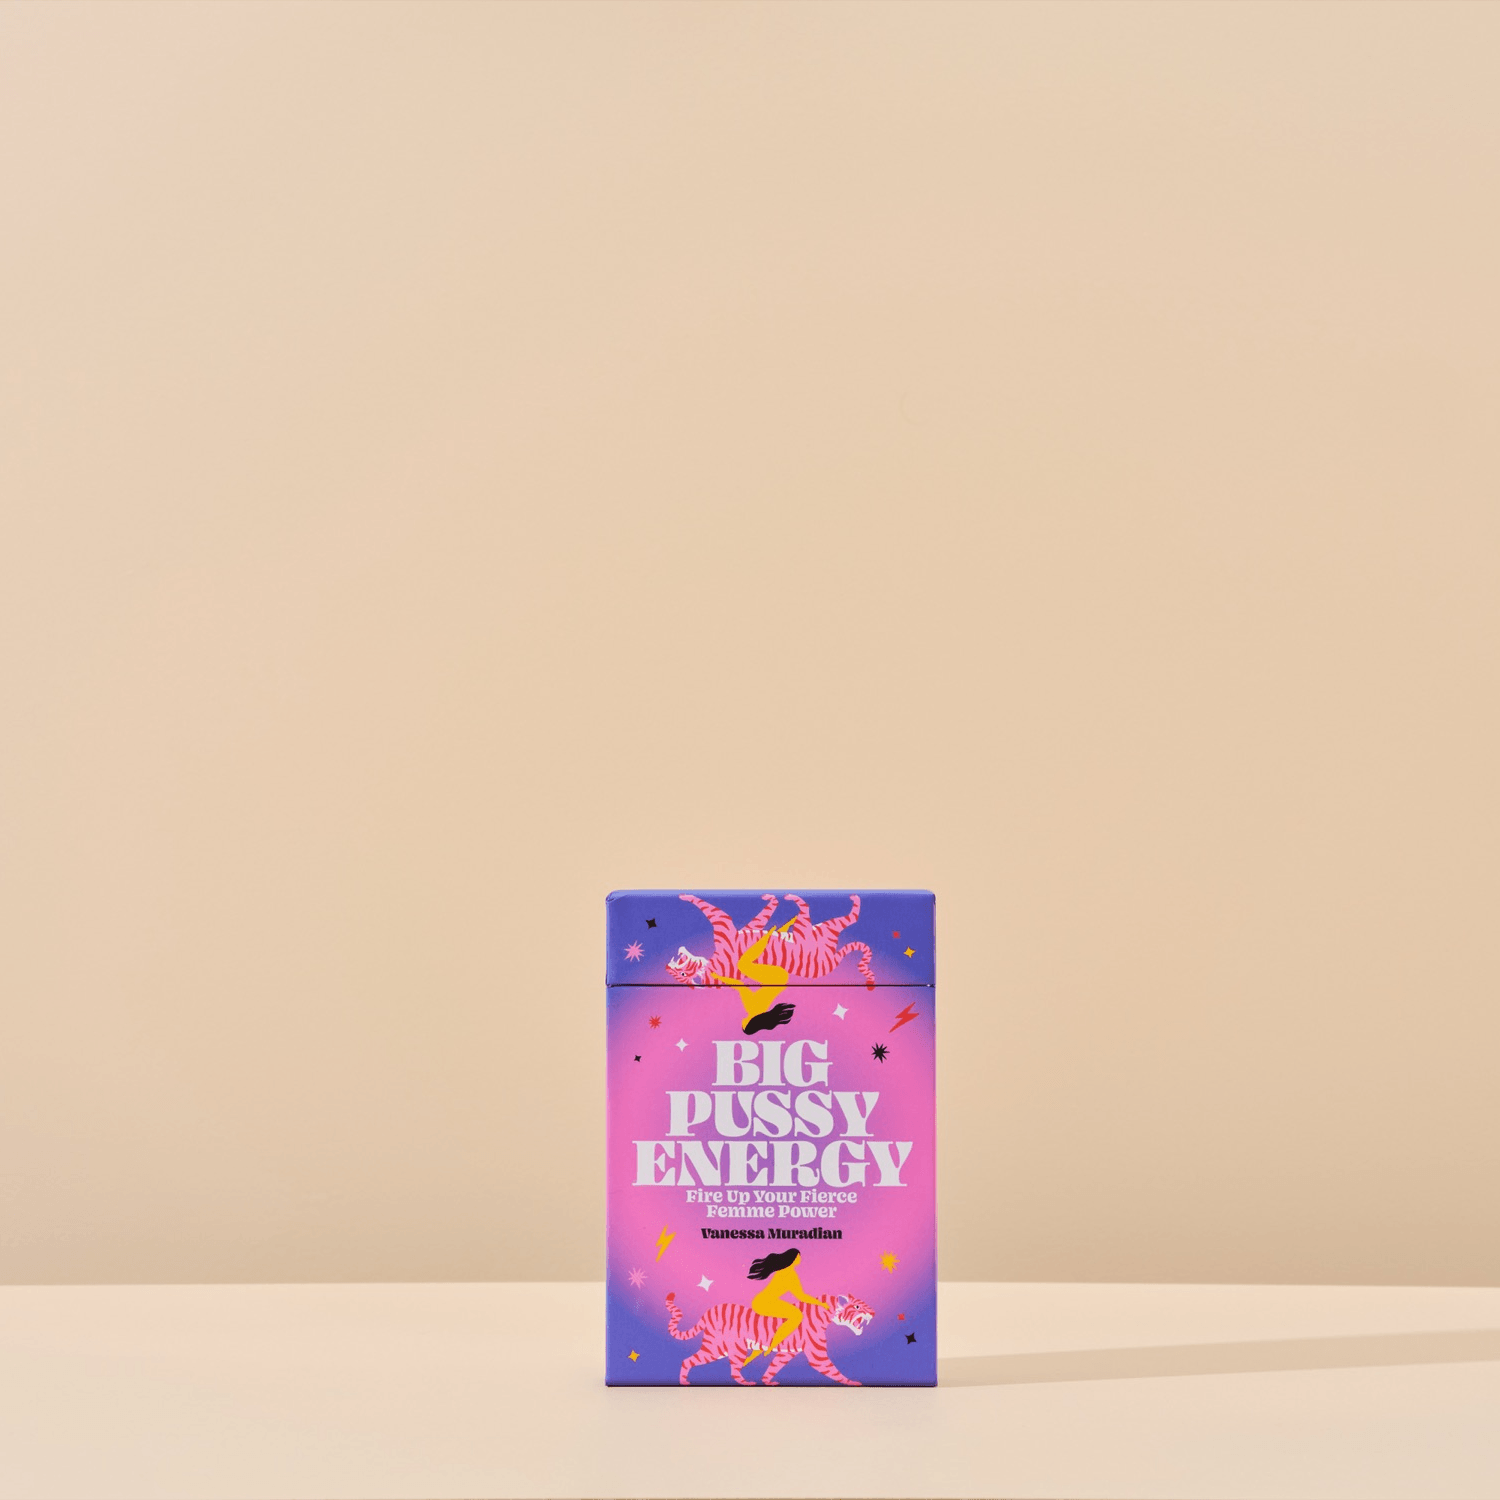 ‘Big Pussy Energy’ card set from Handsel